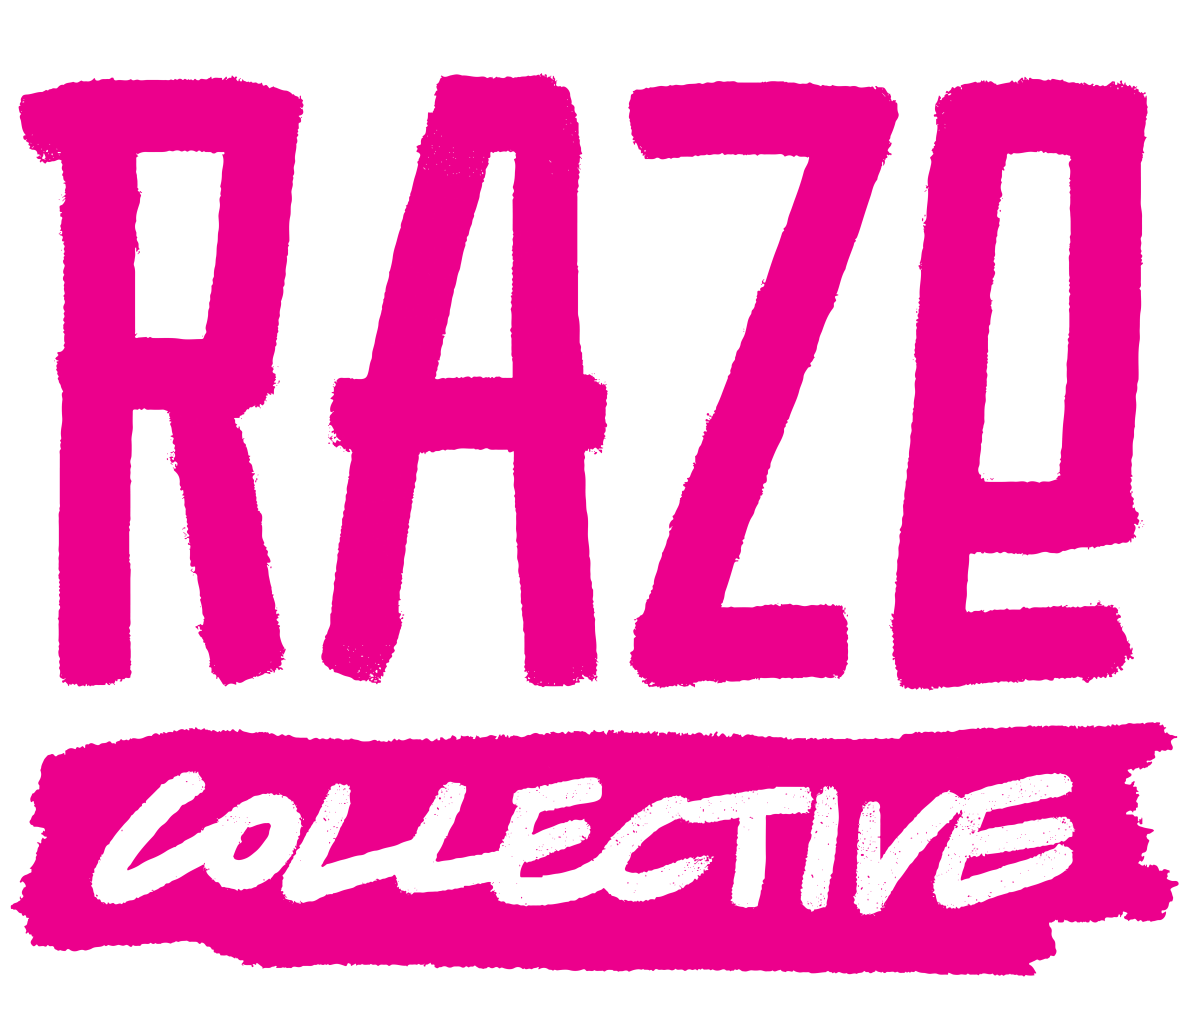 A pink logo in a hand drawn style reading "Raze Collective"